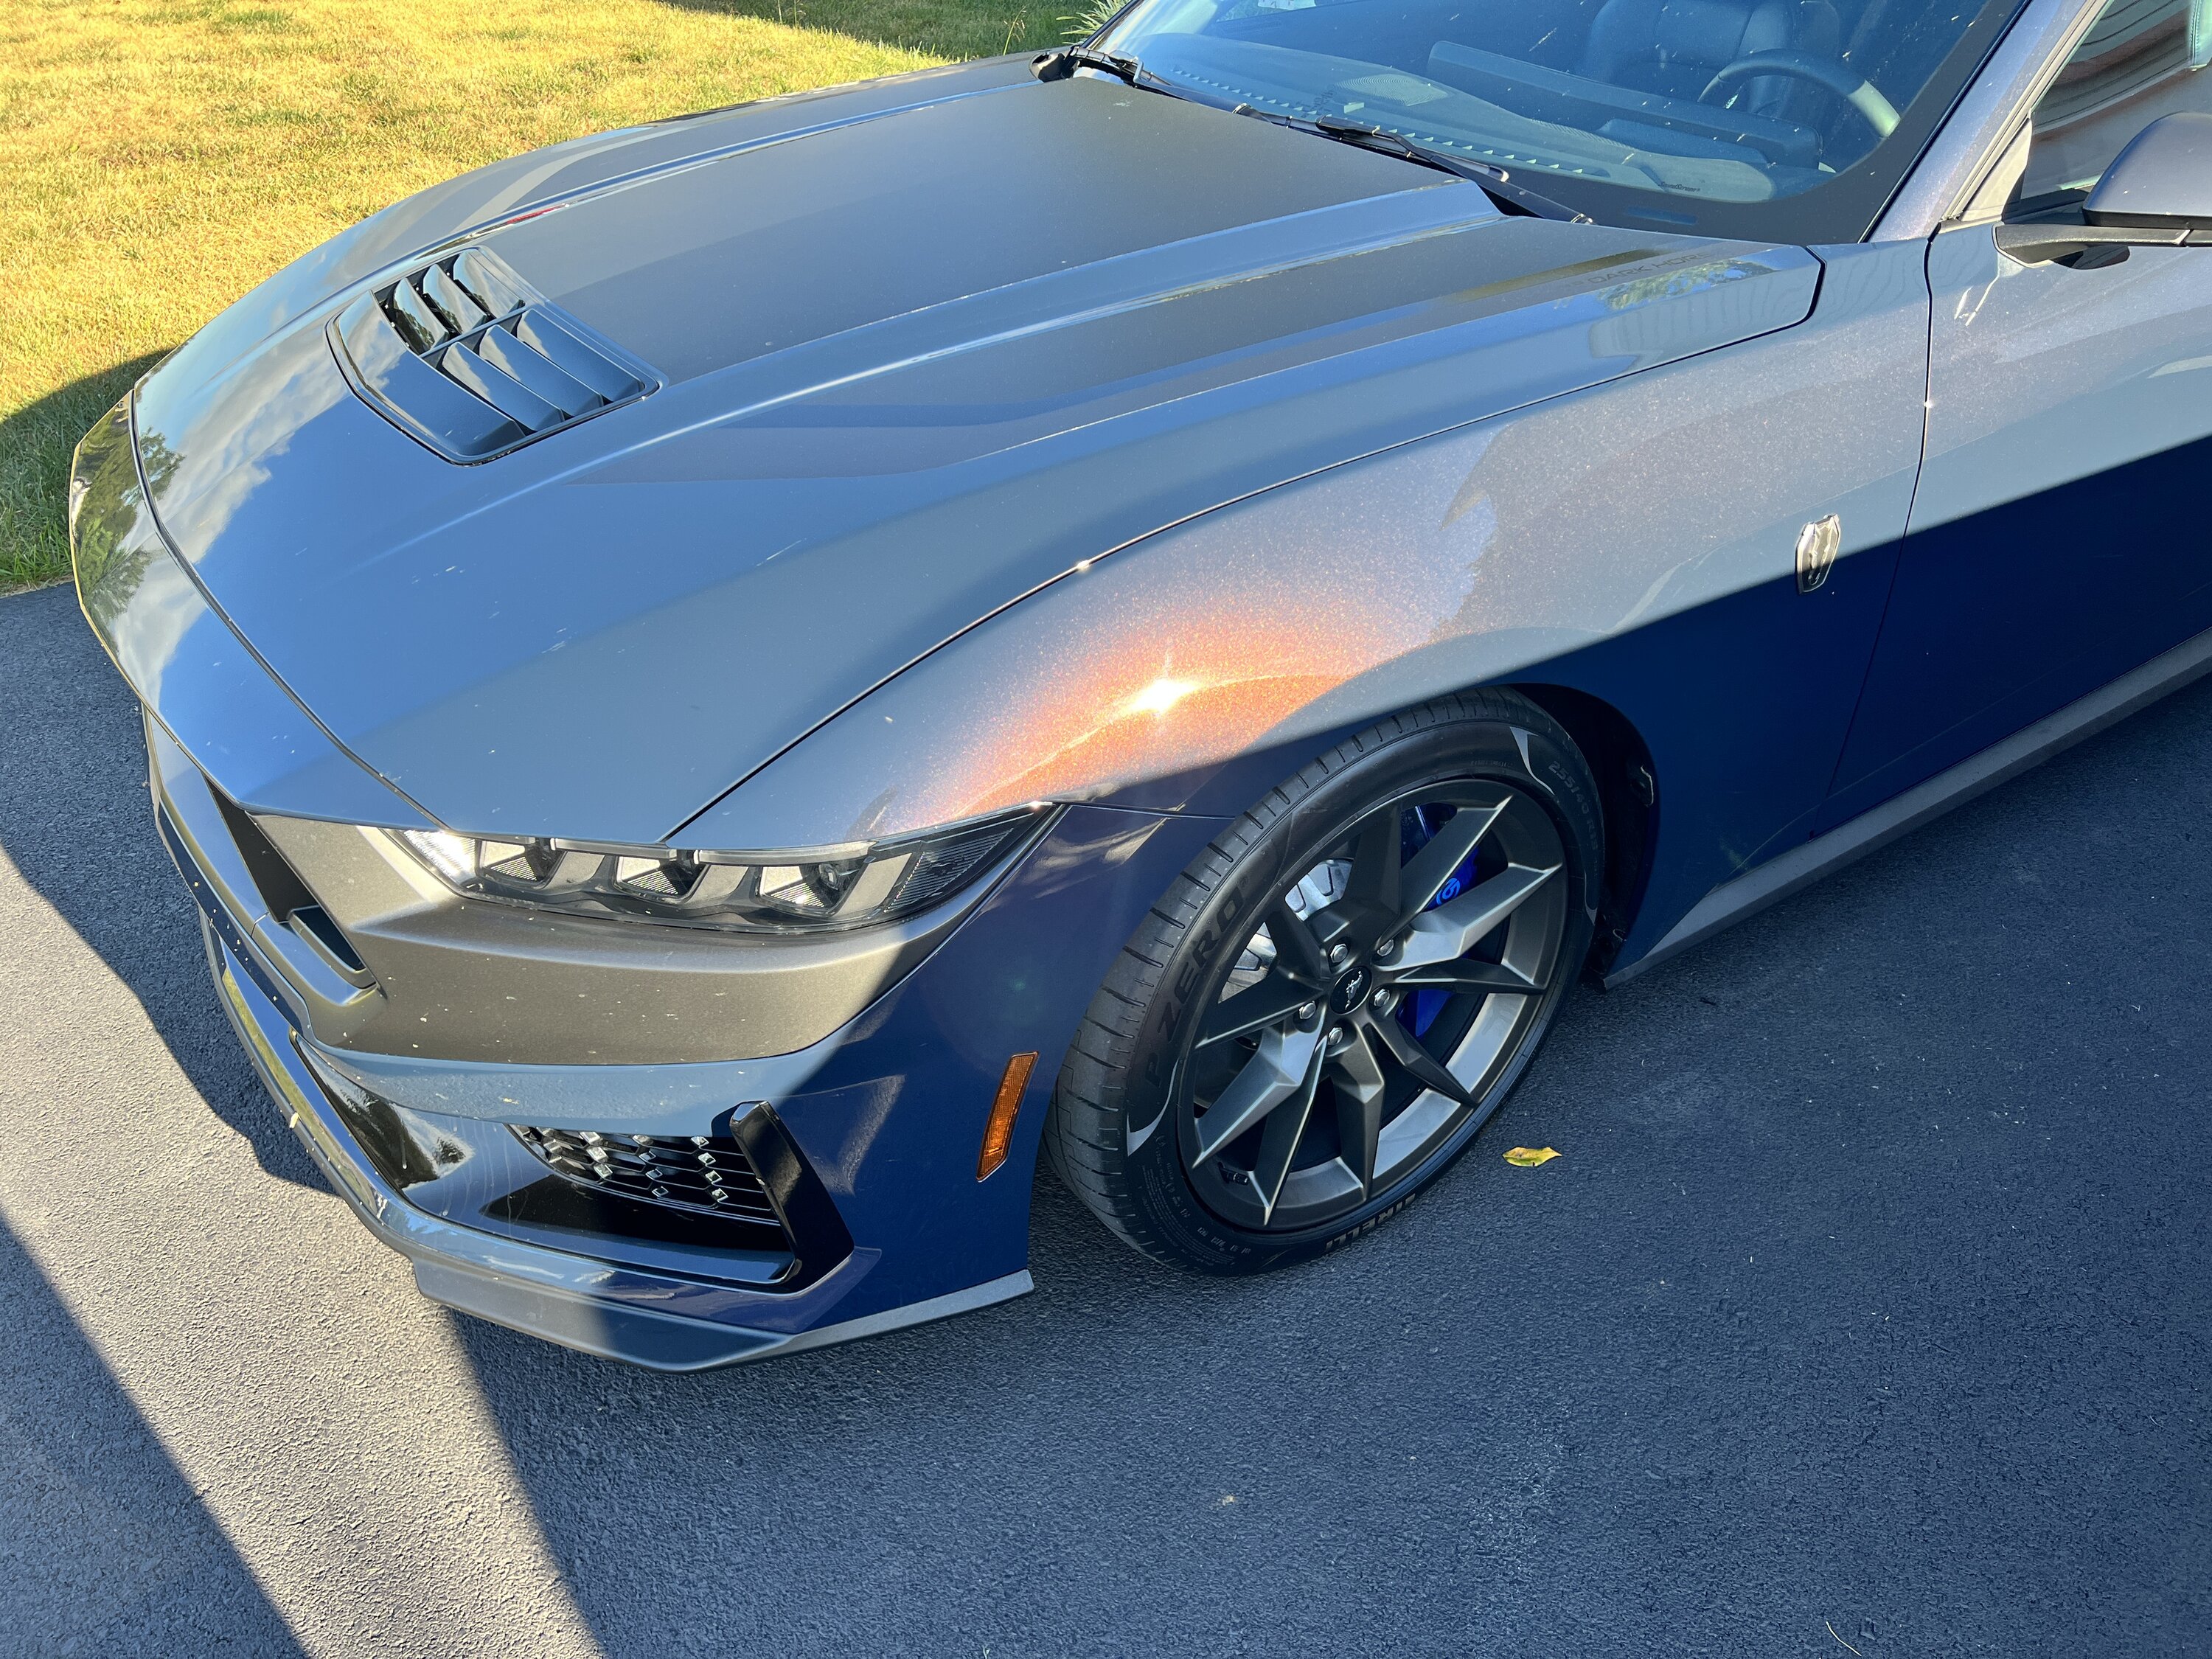 S650 Mustang What Color is Blue Ember IMG_2391.JPG